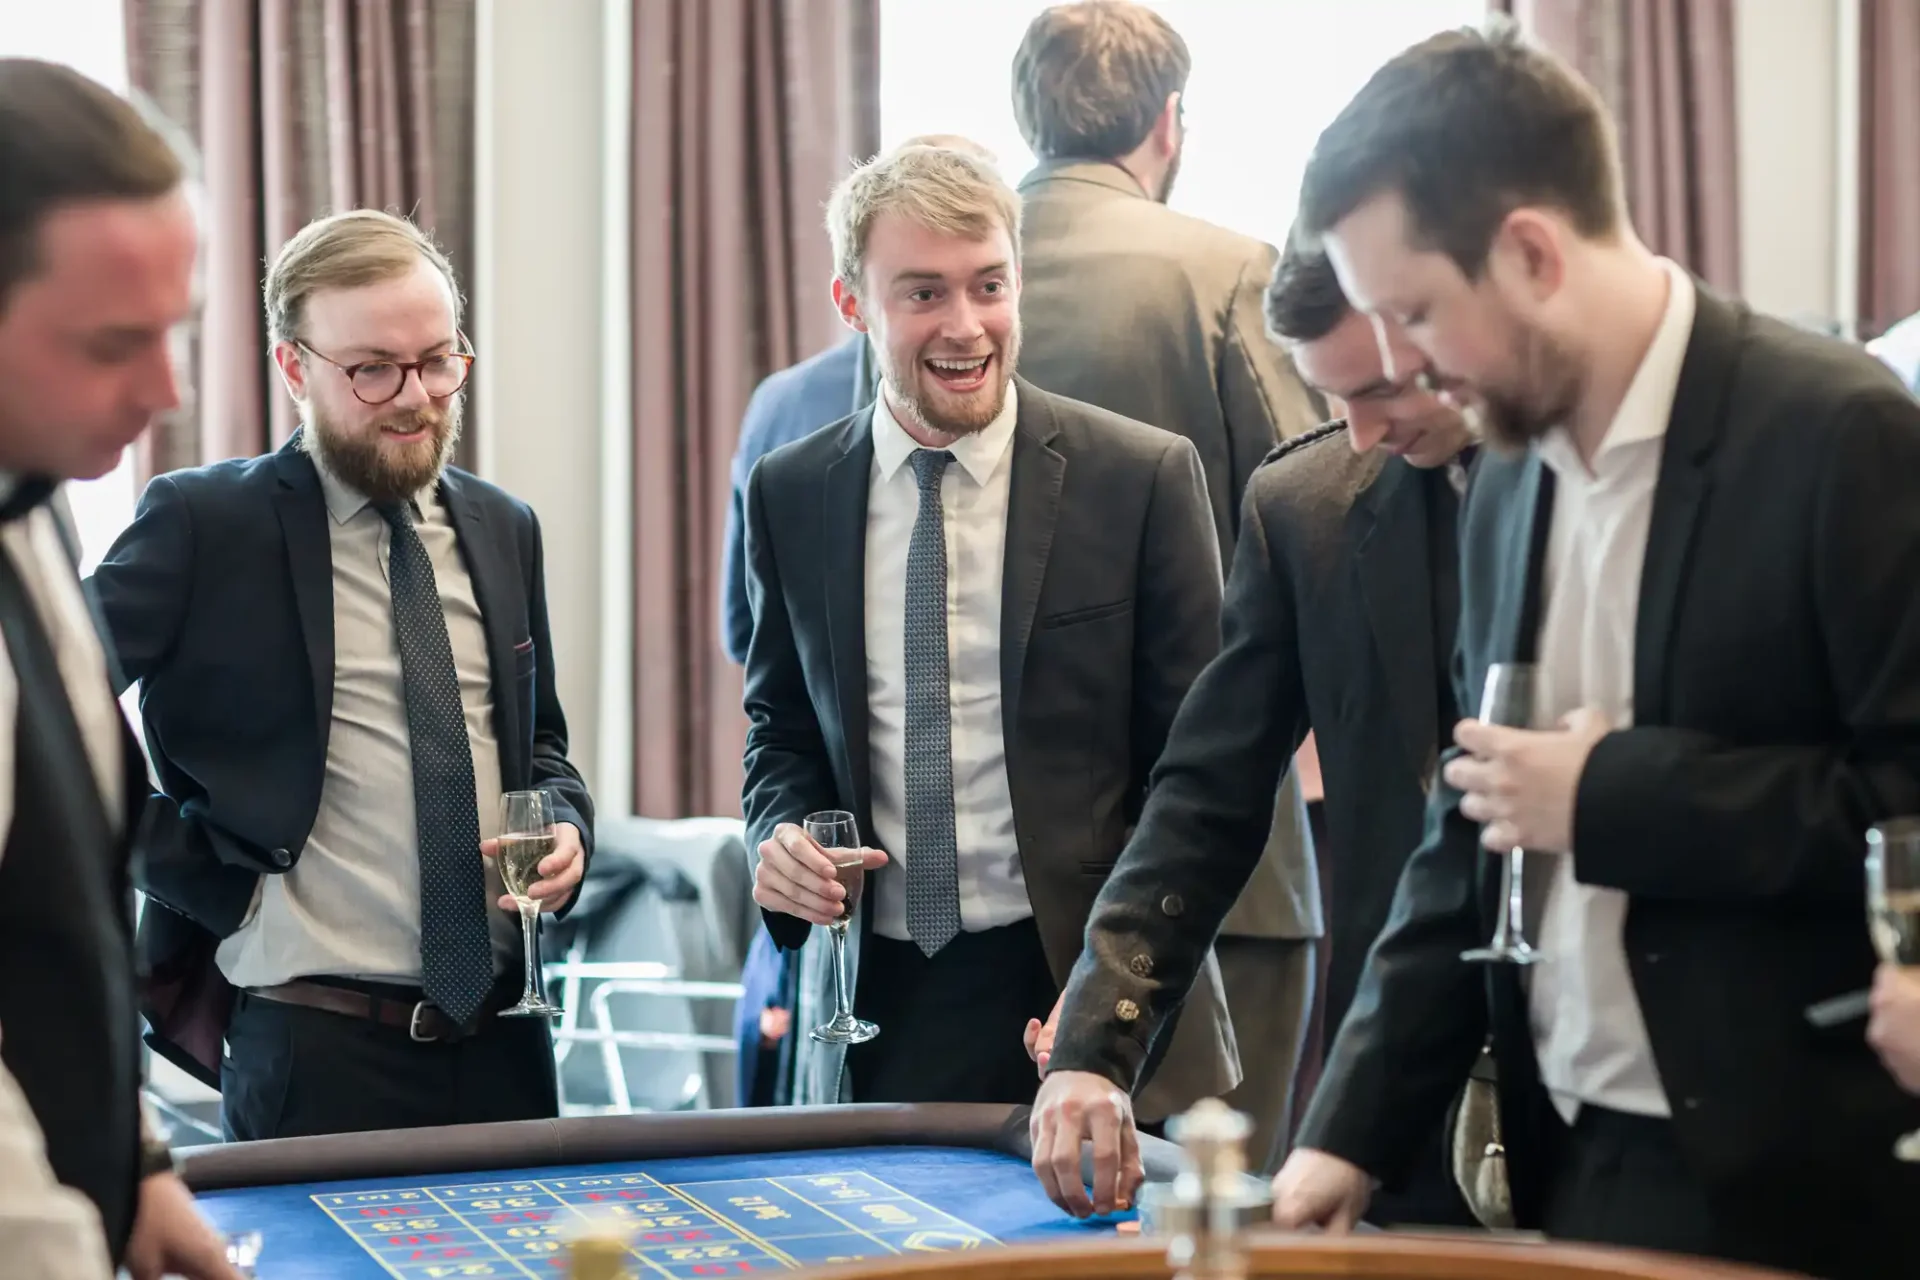 Group of men in suits laughing and engaging in a game at a casino table, holding wine glasses.